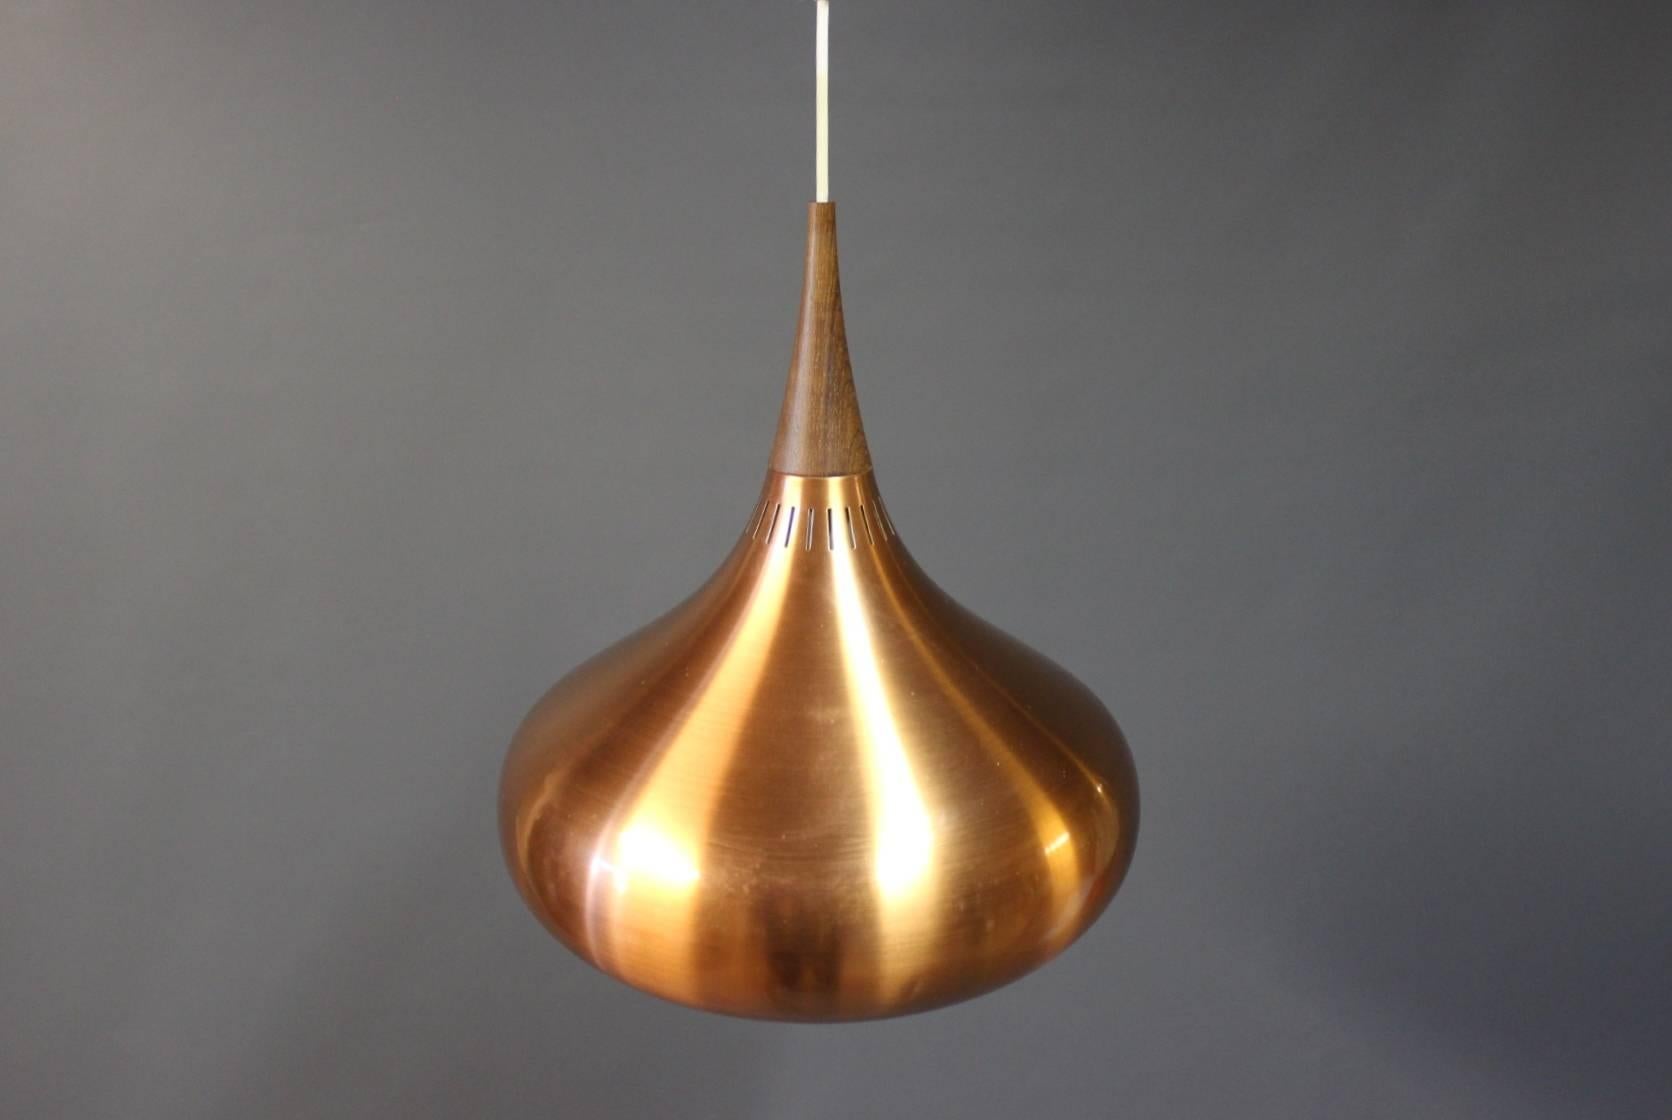 This "Orient" copper pendant, model P2, was designed by Jo Hammerborg for Fog & Mørup in Denmark in the 1960s. This lamp is in brushed copper and rosewood.